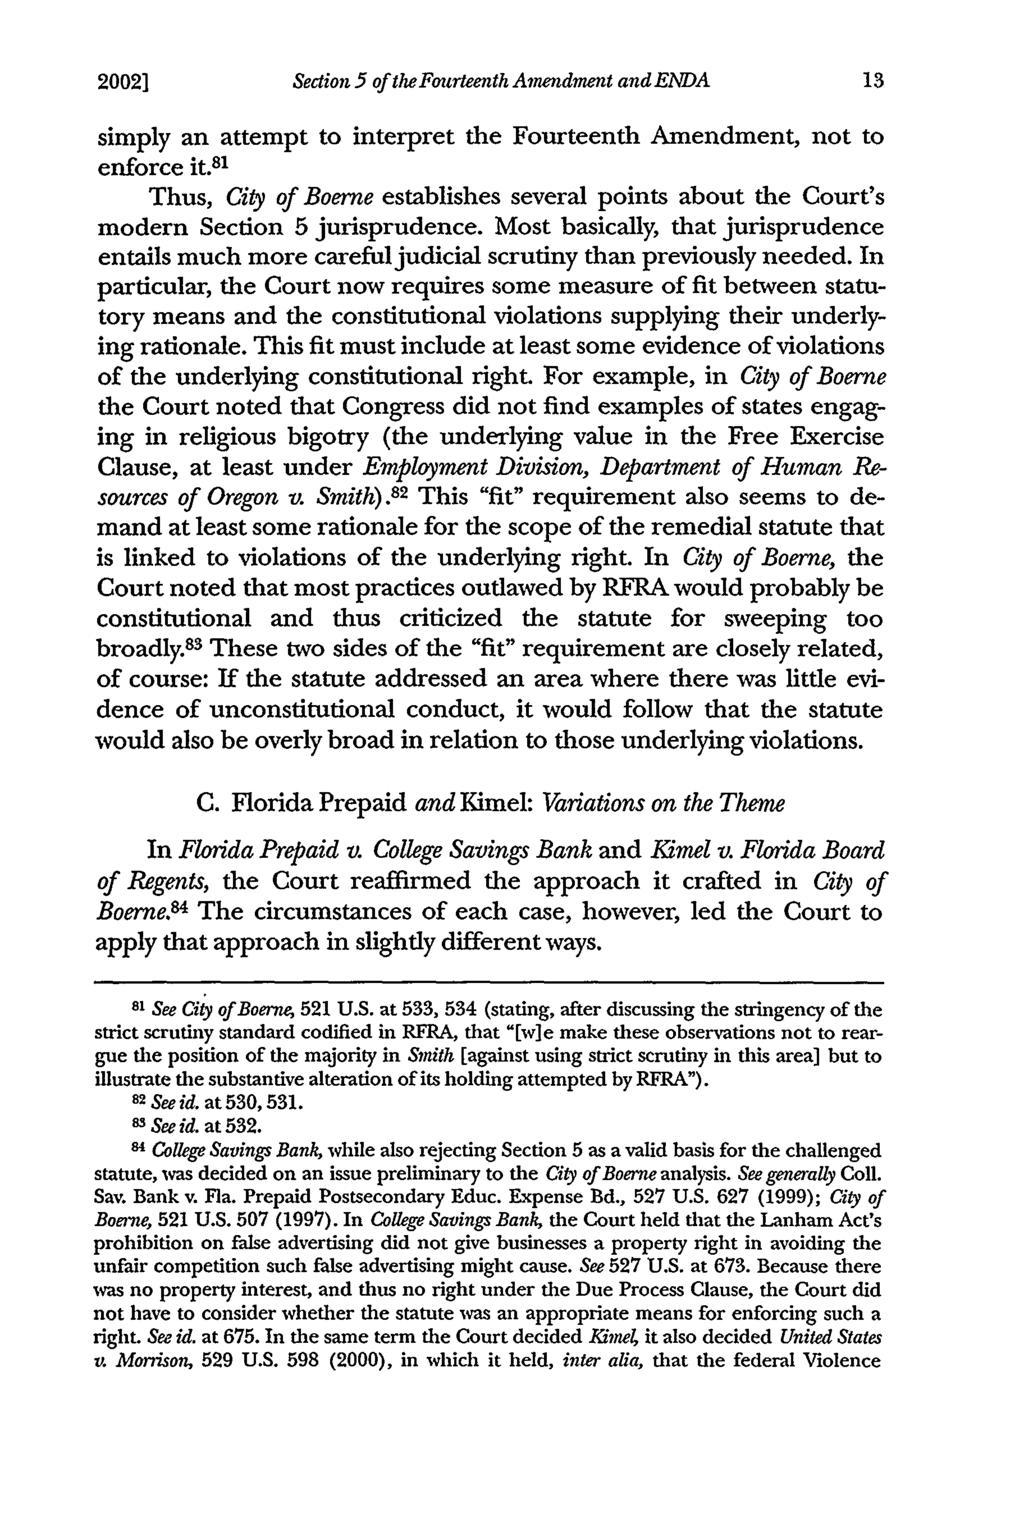 2002] Section 5 of the Fourteenth Amendment and ENDA simply an attempt to interpret the Fourteenth Amendment, not to enforce it.